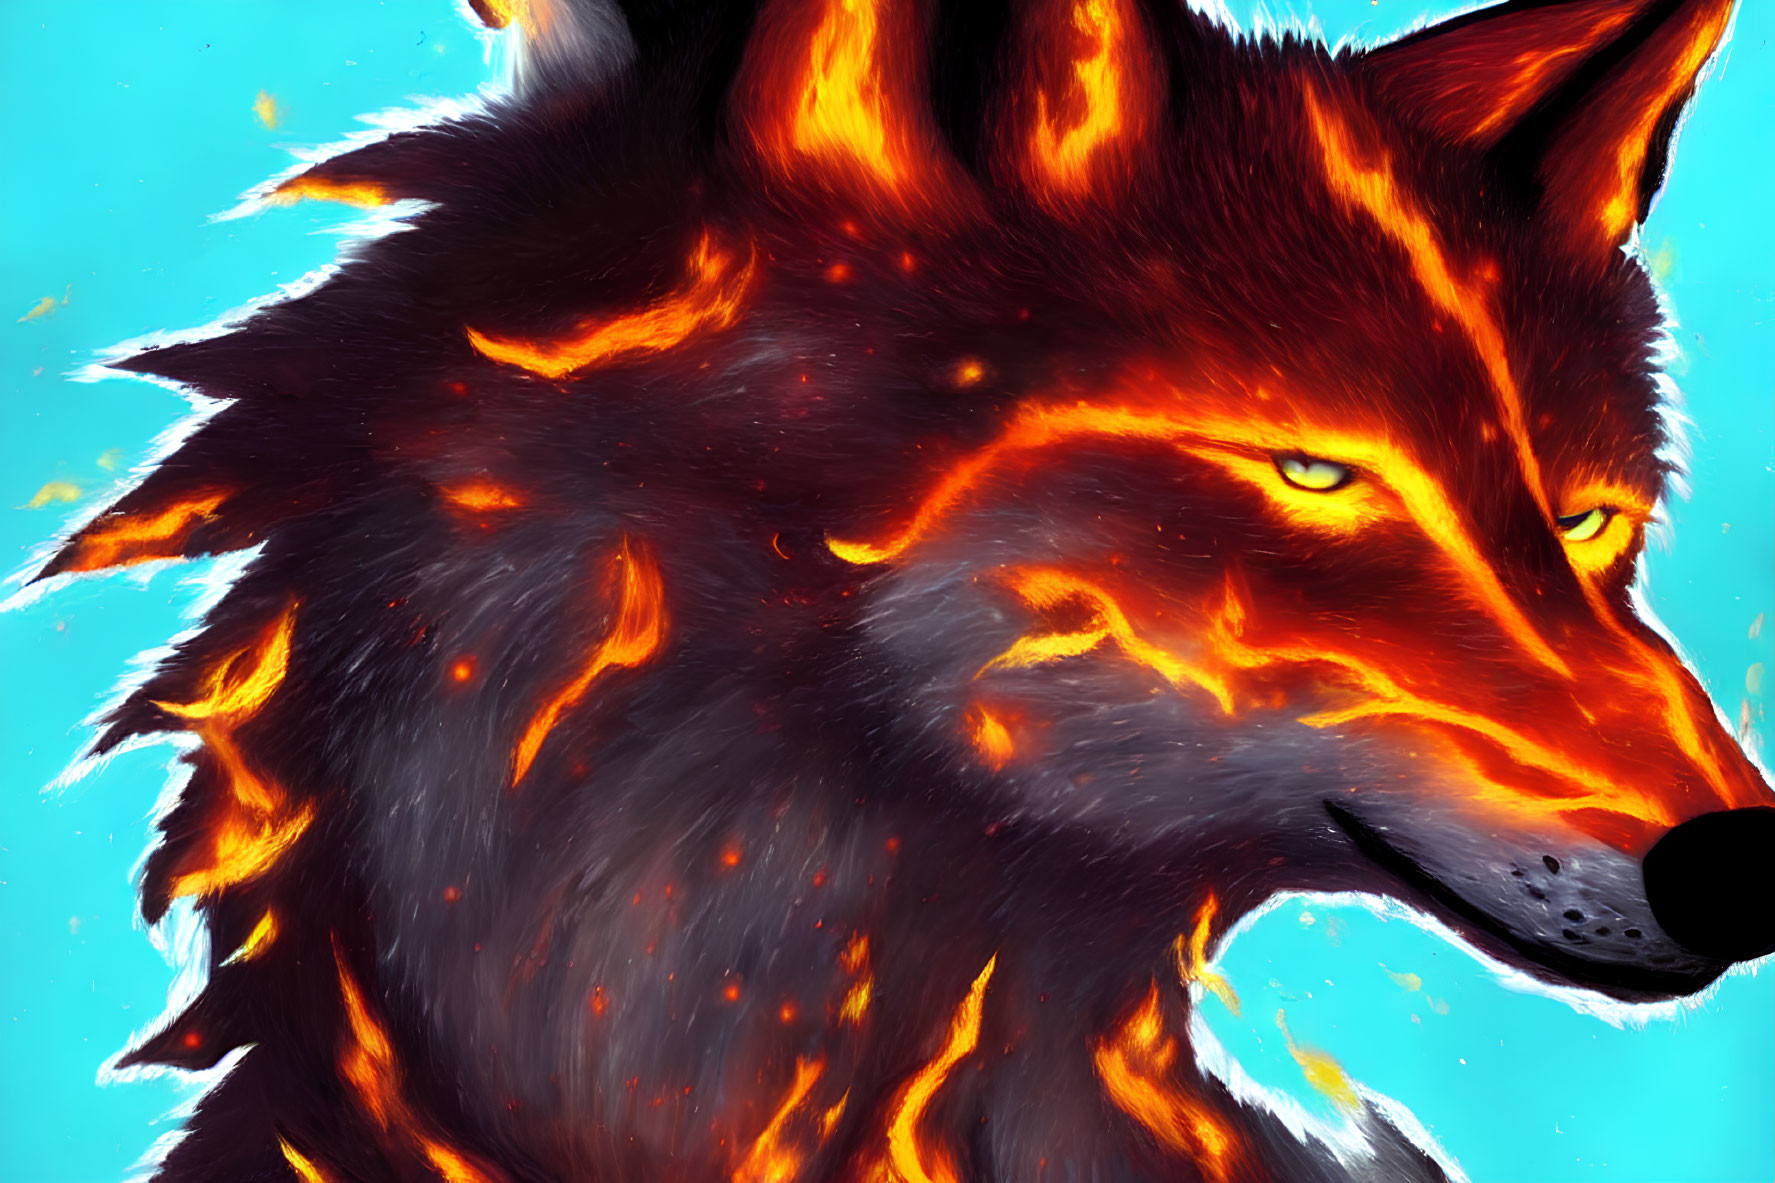 Vibrant wolf artwork with fiery fur on blue background